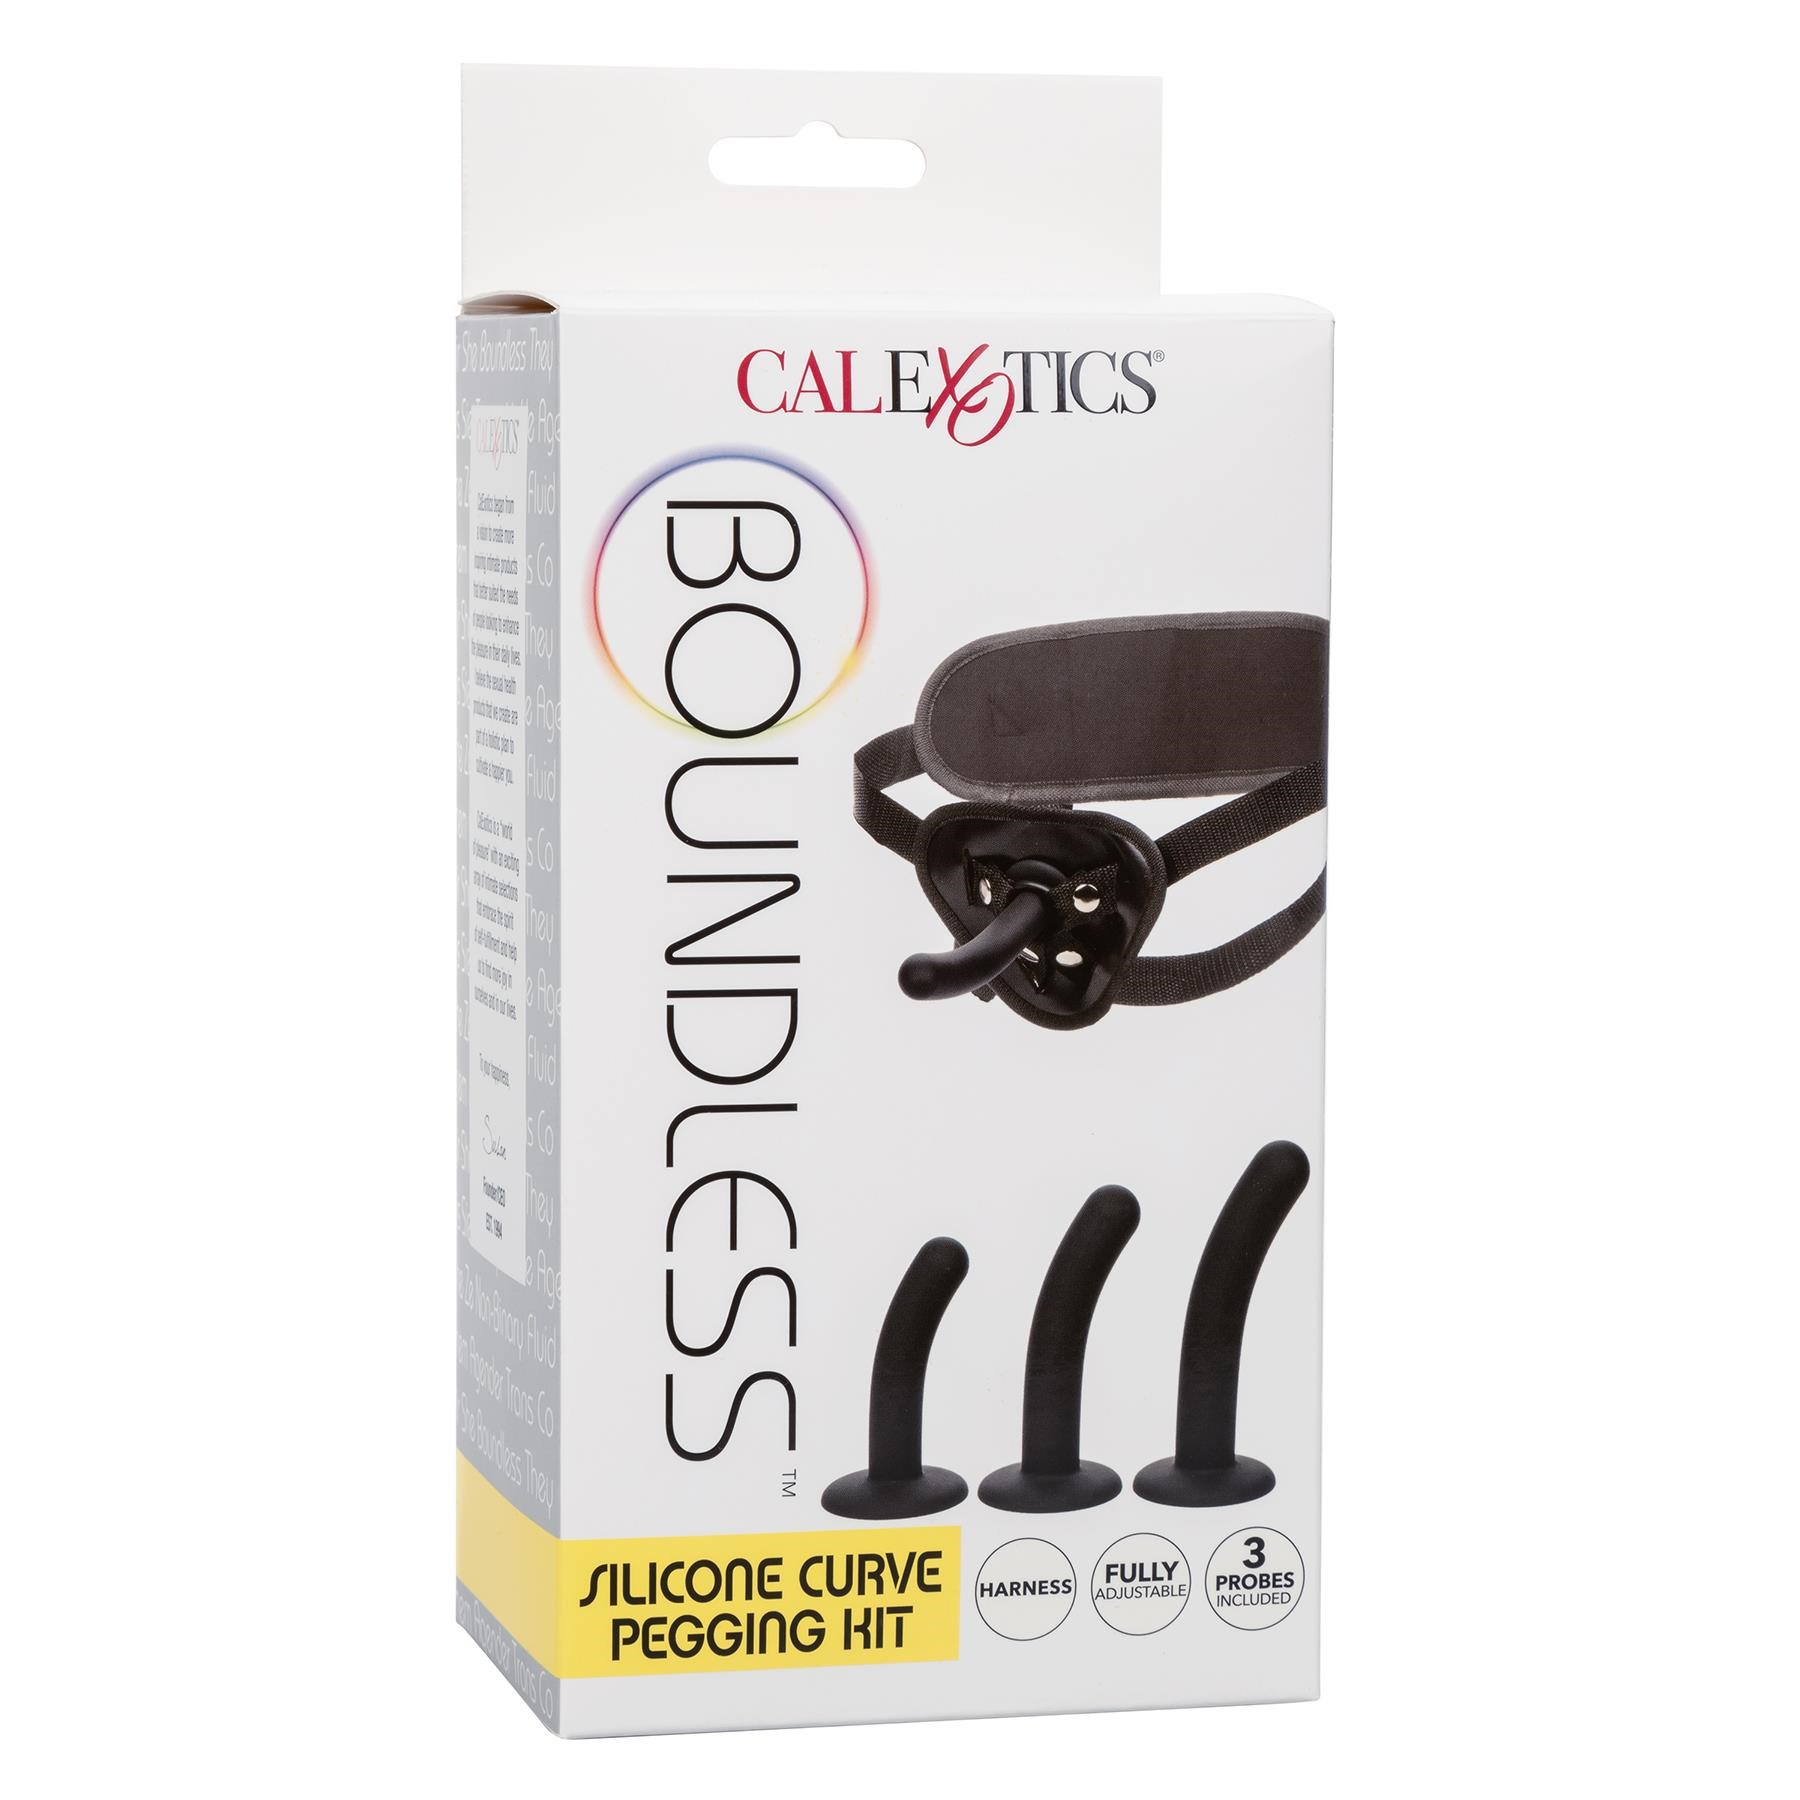 Boundless Silicone Curve Pegging Kit - Packaging